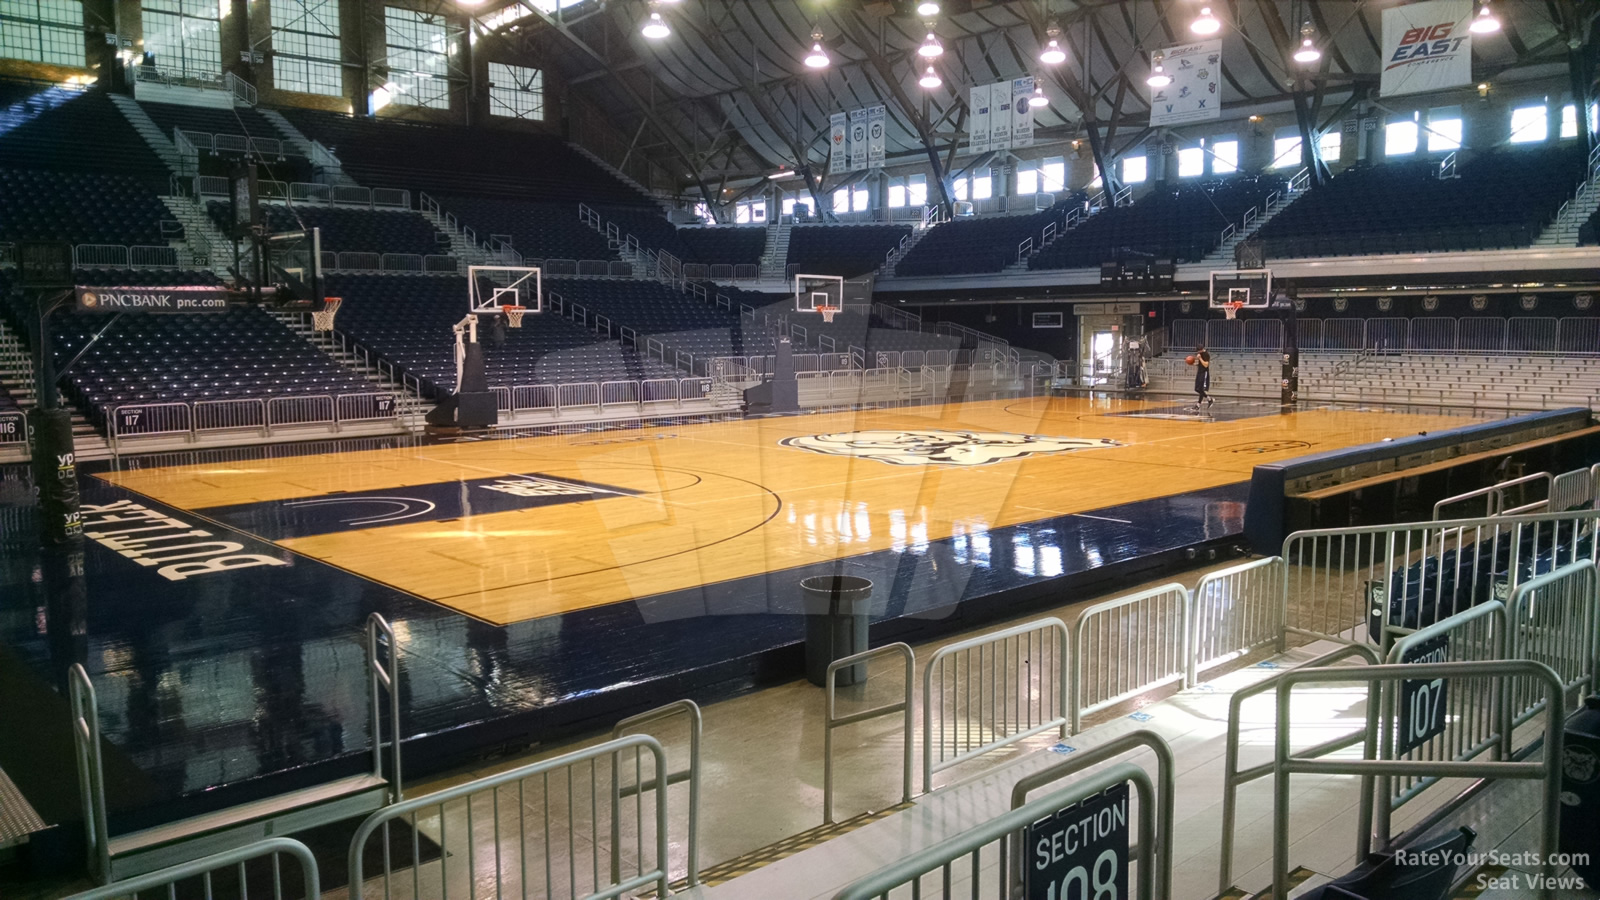 section 108, row 6 seat view  - hinkle fieldhouse